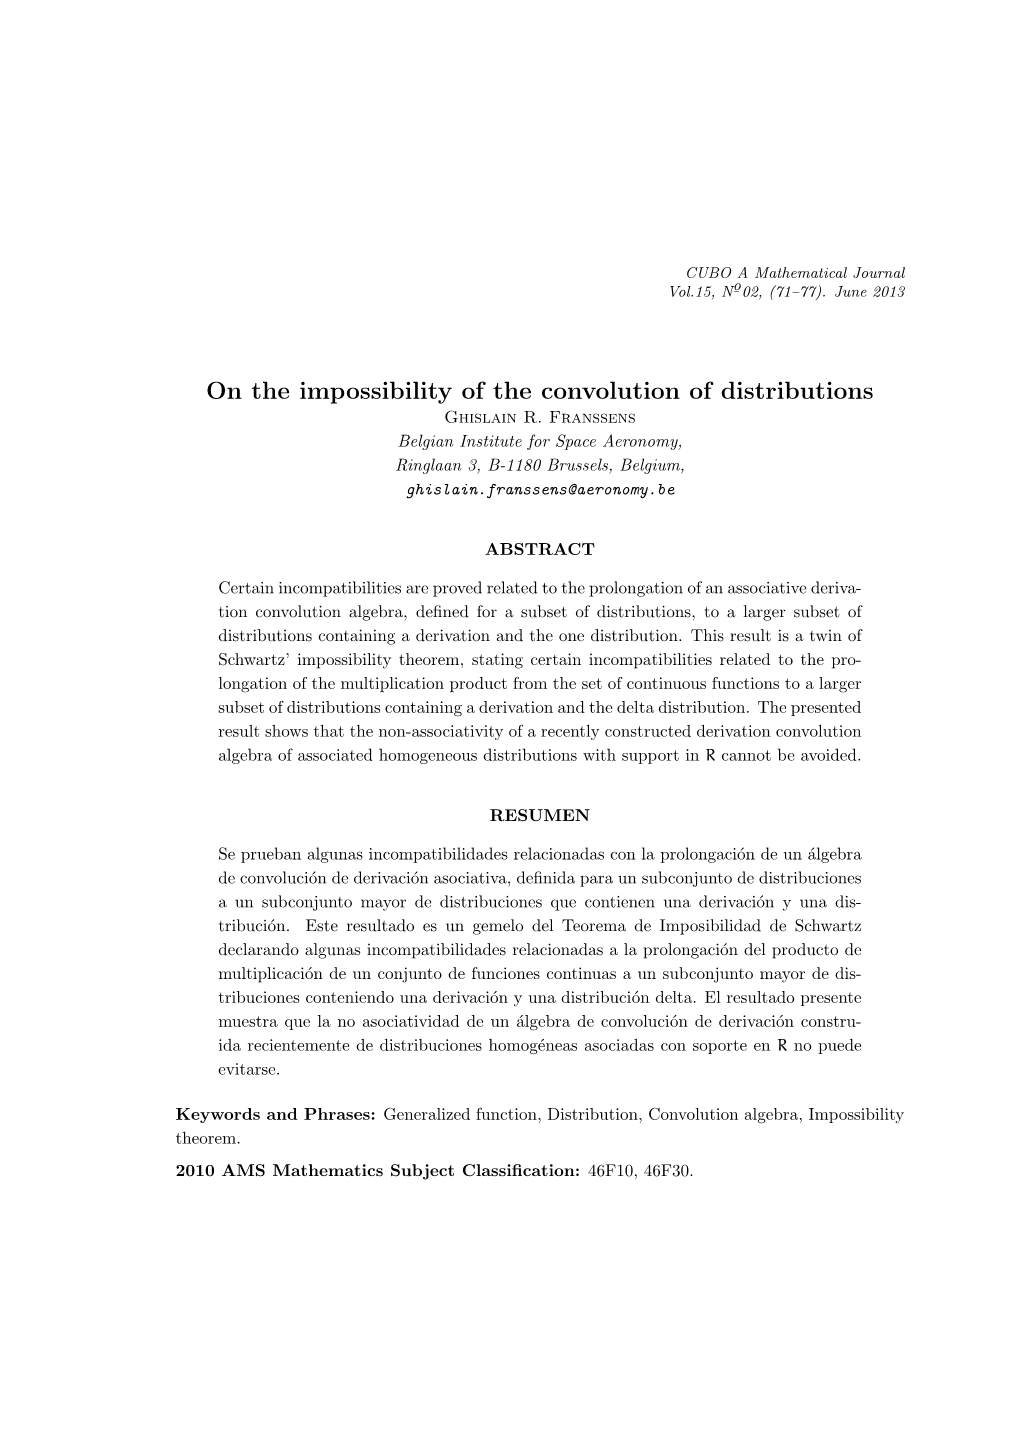 On the Impossibility of the Convolution of Distributions Ghislain R